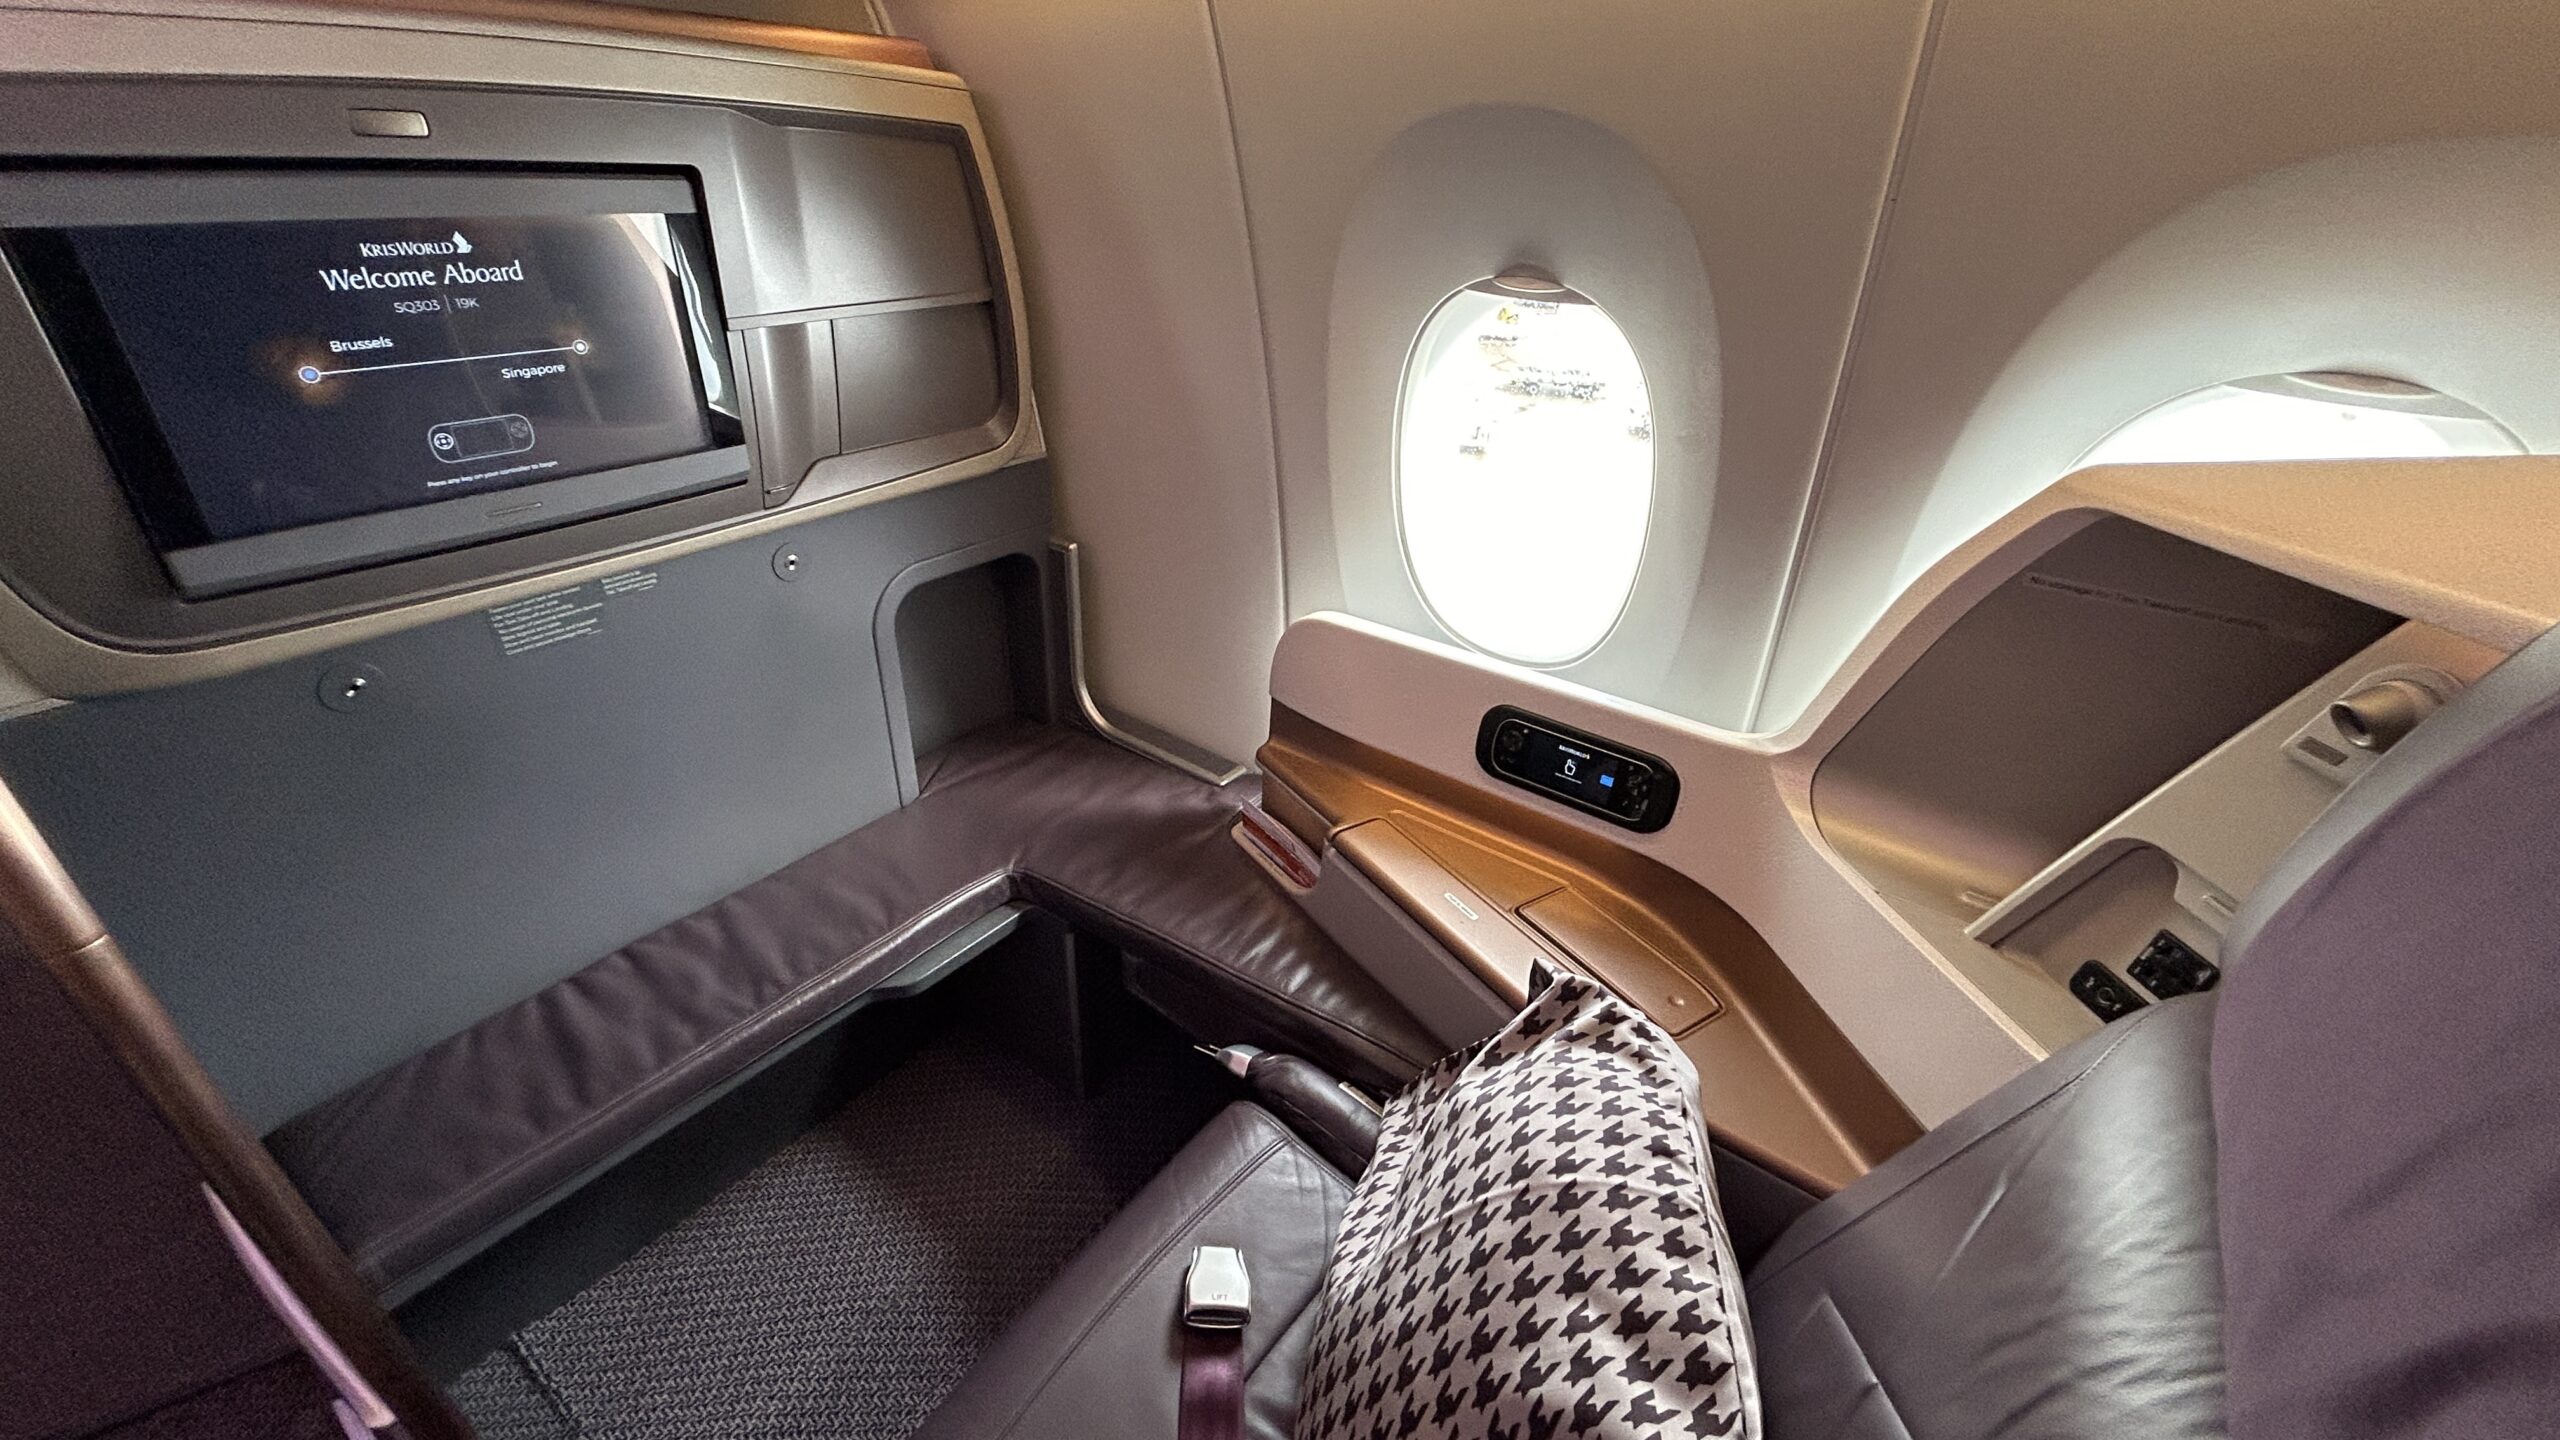 Singapore Airlines A350 Business Class Singapore to Brussels Suite Seat Point Hacks by Daniel Sciberras